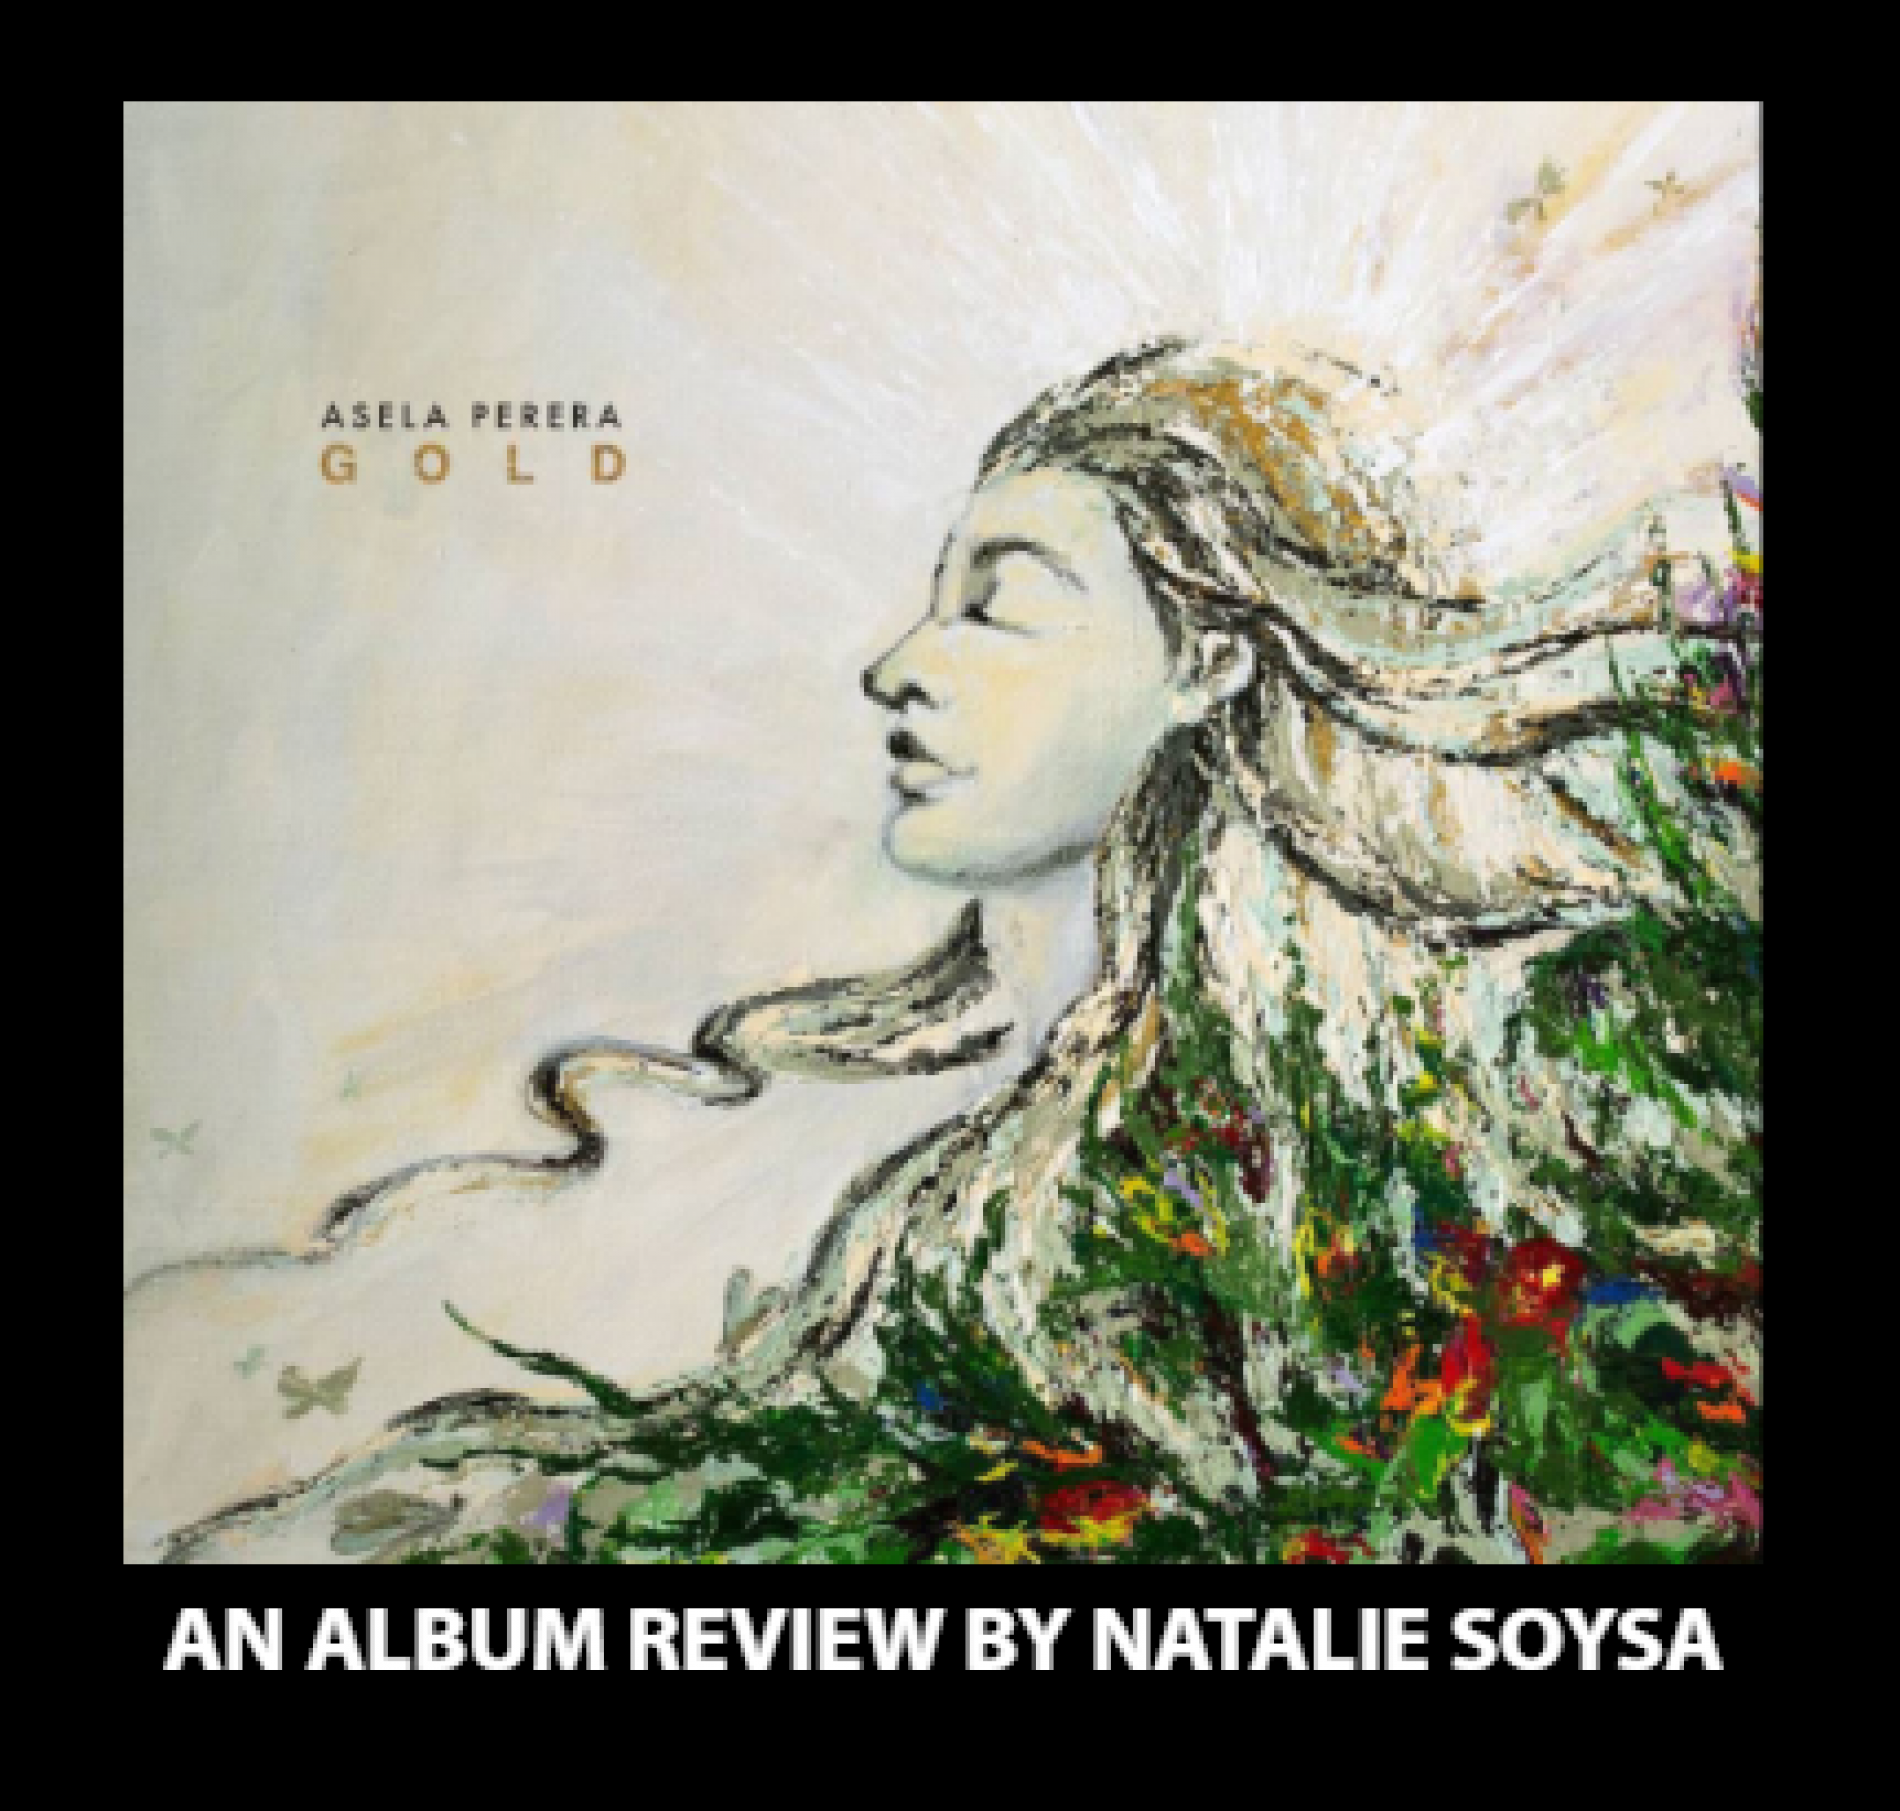 Pure GOLD – A Review of Asela Perera’s 2nd Full Length Album By Natalie Soysa